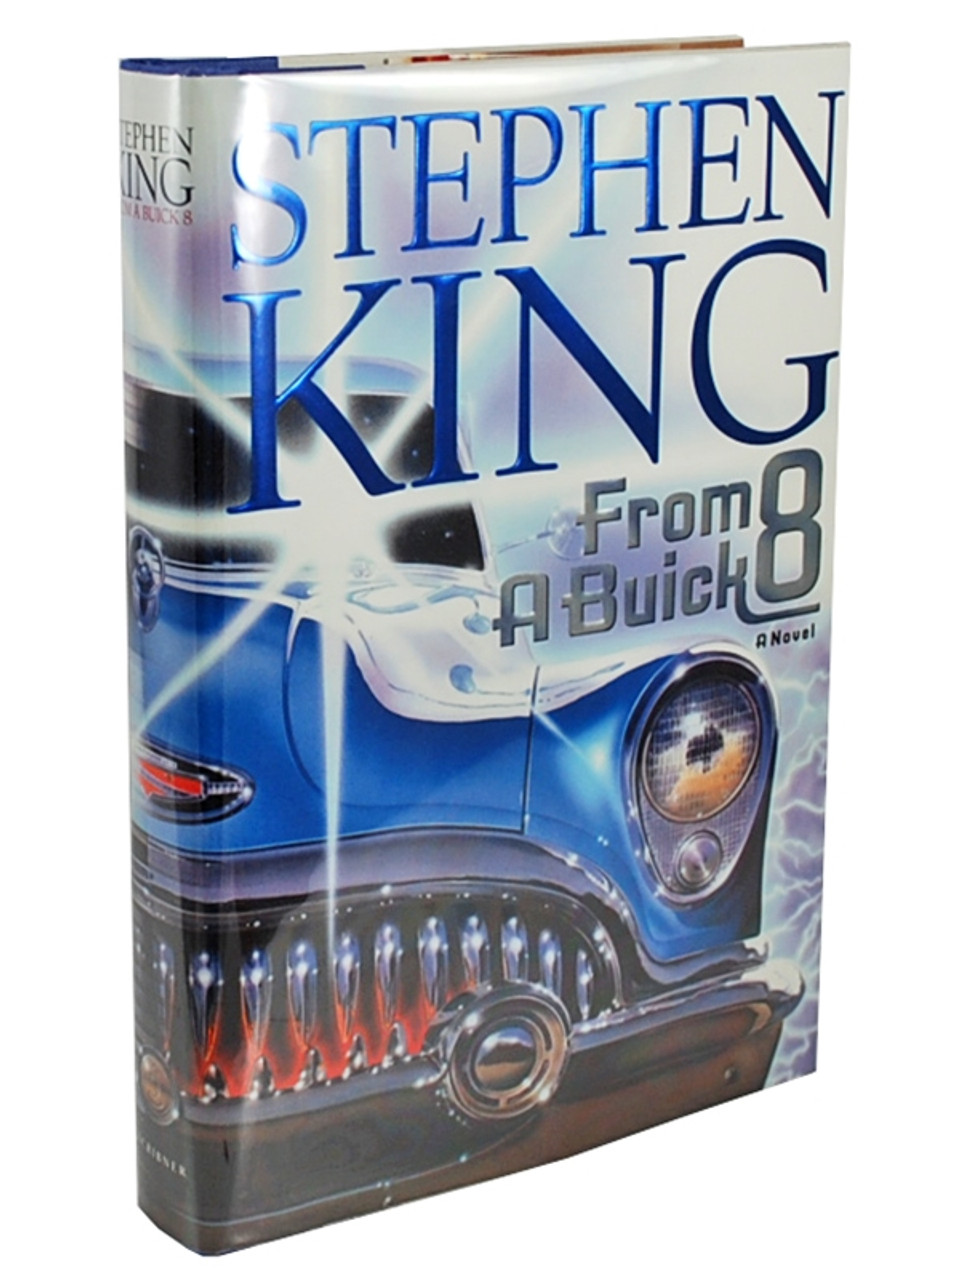 Stephen King "From a Buick 8" Signed First Edition